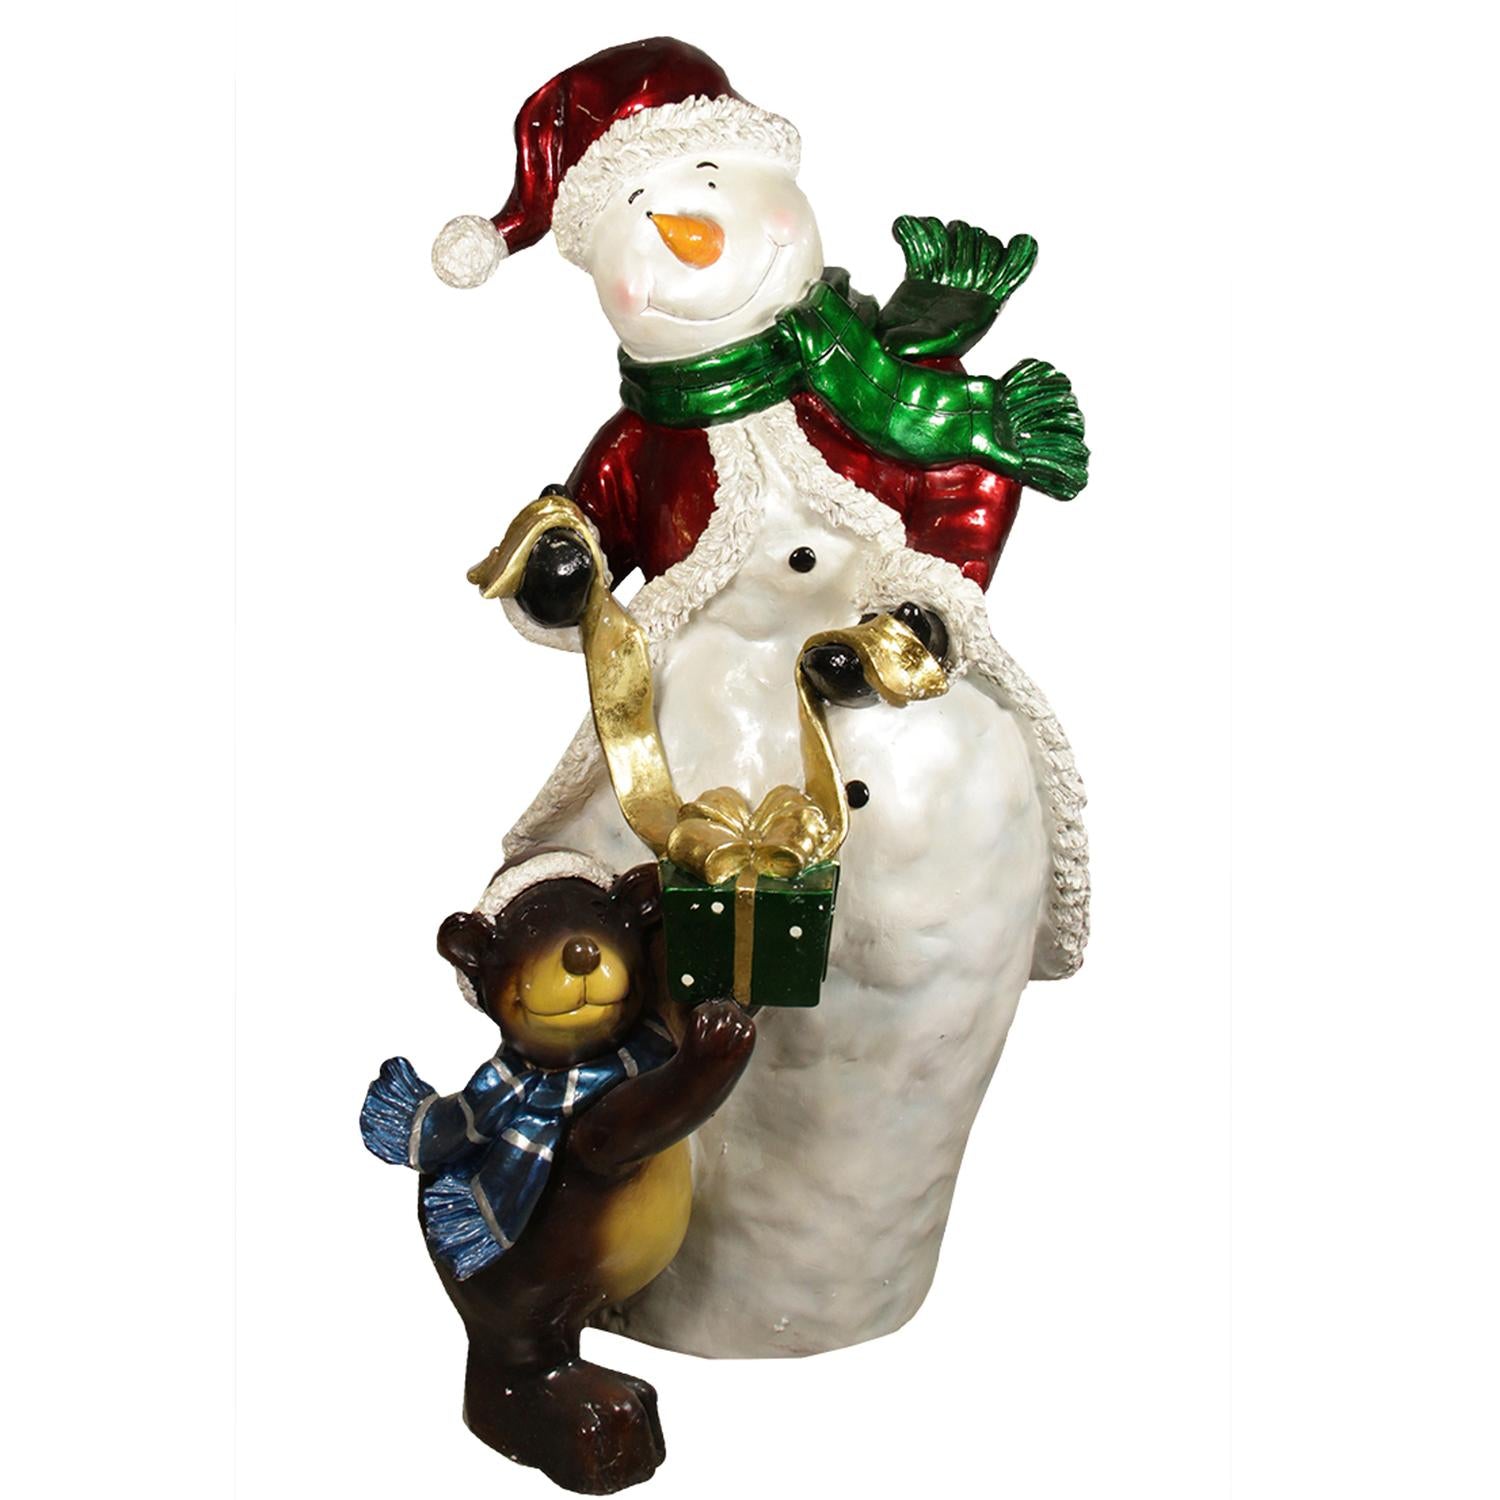 48" Commercial Size Snowman with Bear Christmas Display Outdoor Decoration